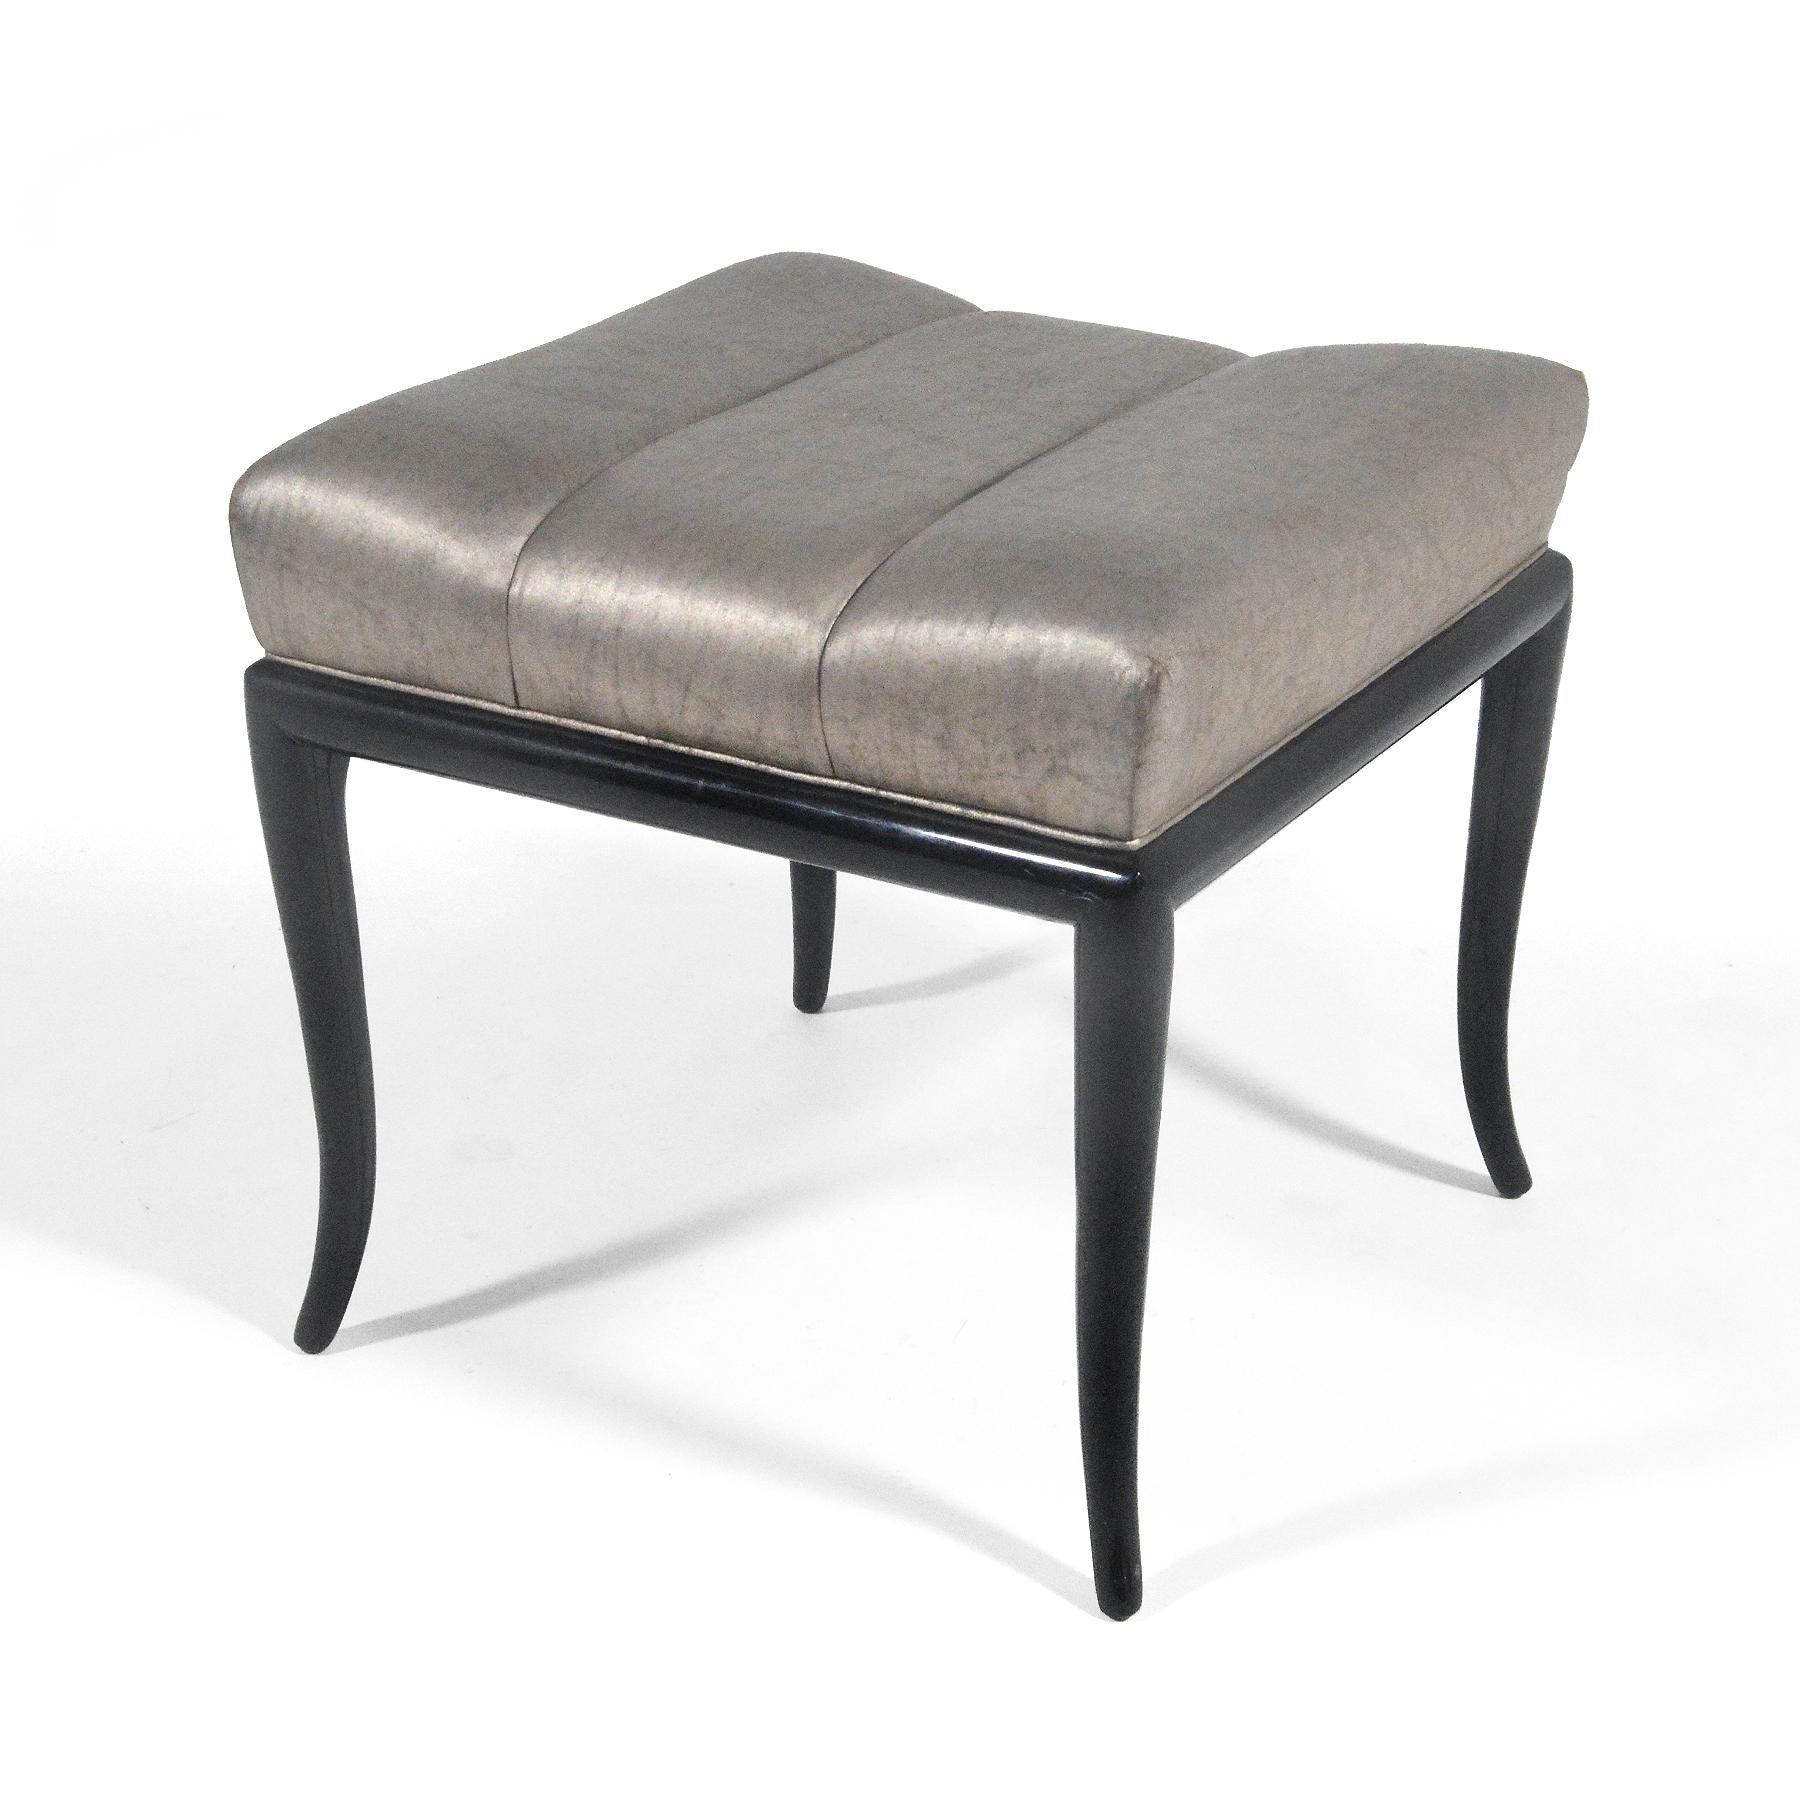 Typical of Robsjohn-Gibbings' refined aesthetic, this stool is elegant and sexy, with graceful lines. The base is finished in black lacquer and topped with a seat upholstered in a champaign colored silk.